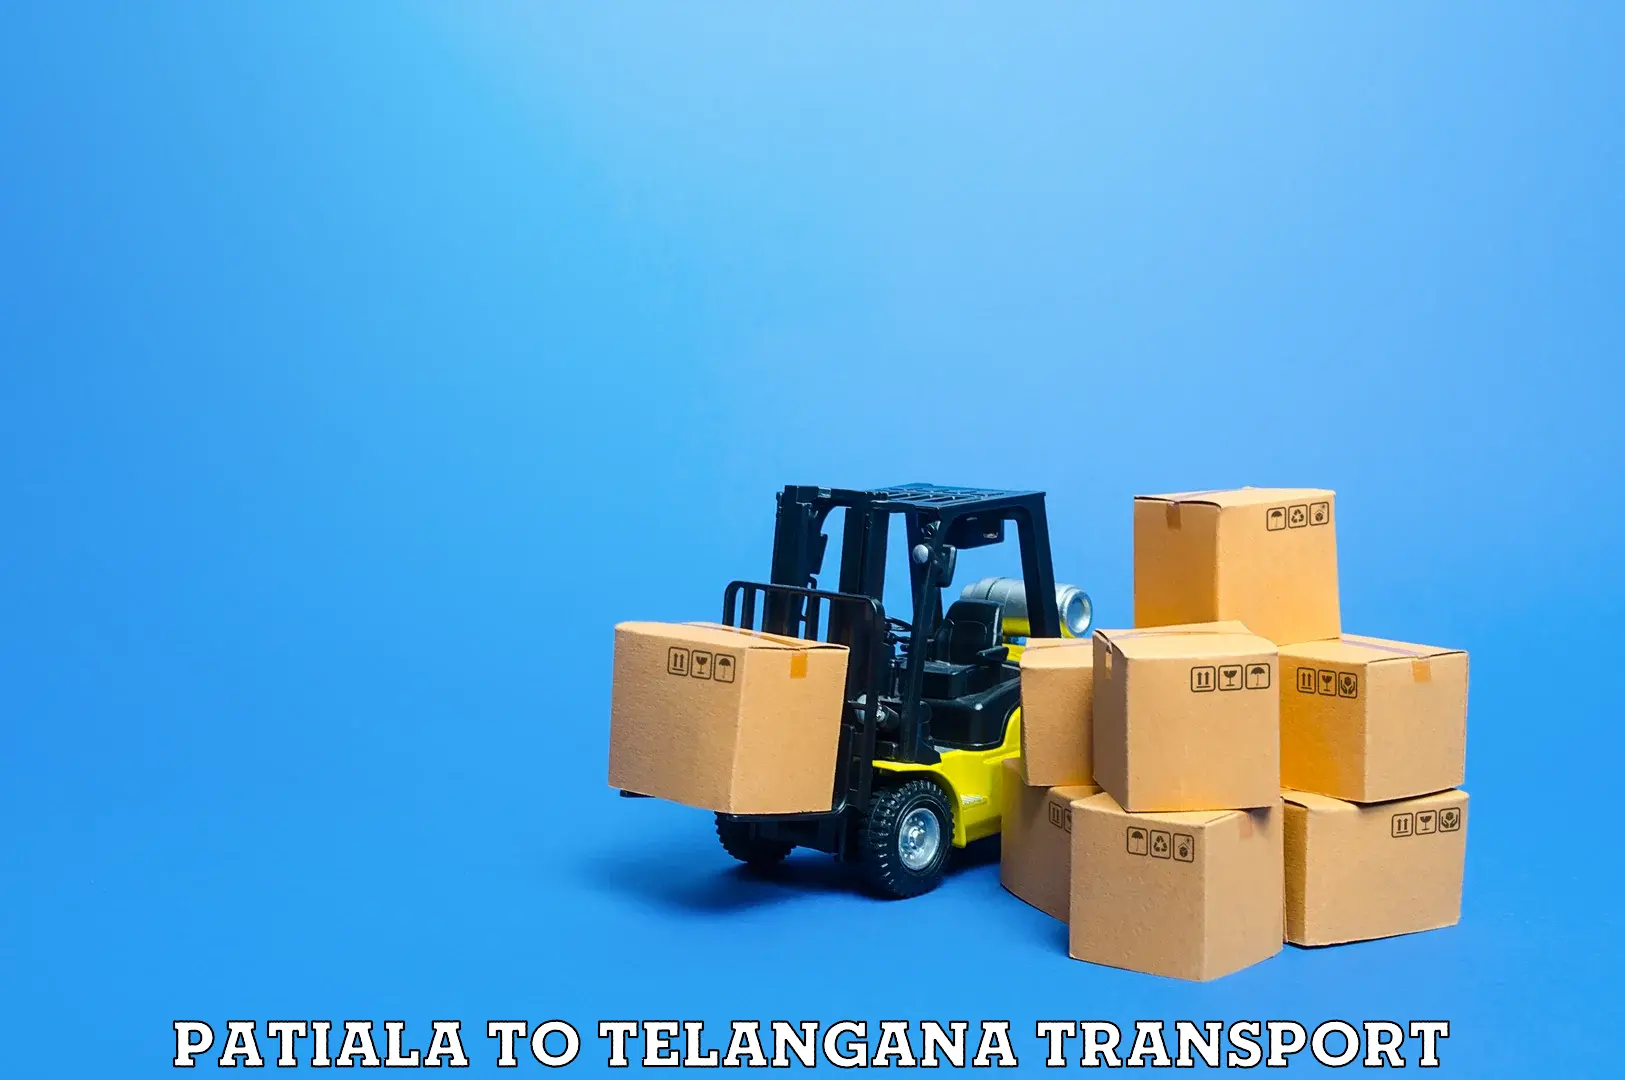 Container transport service Patiala to Bejjanki